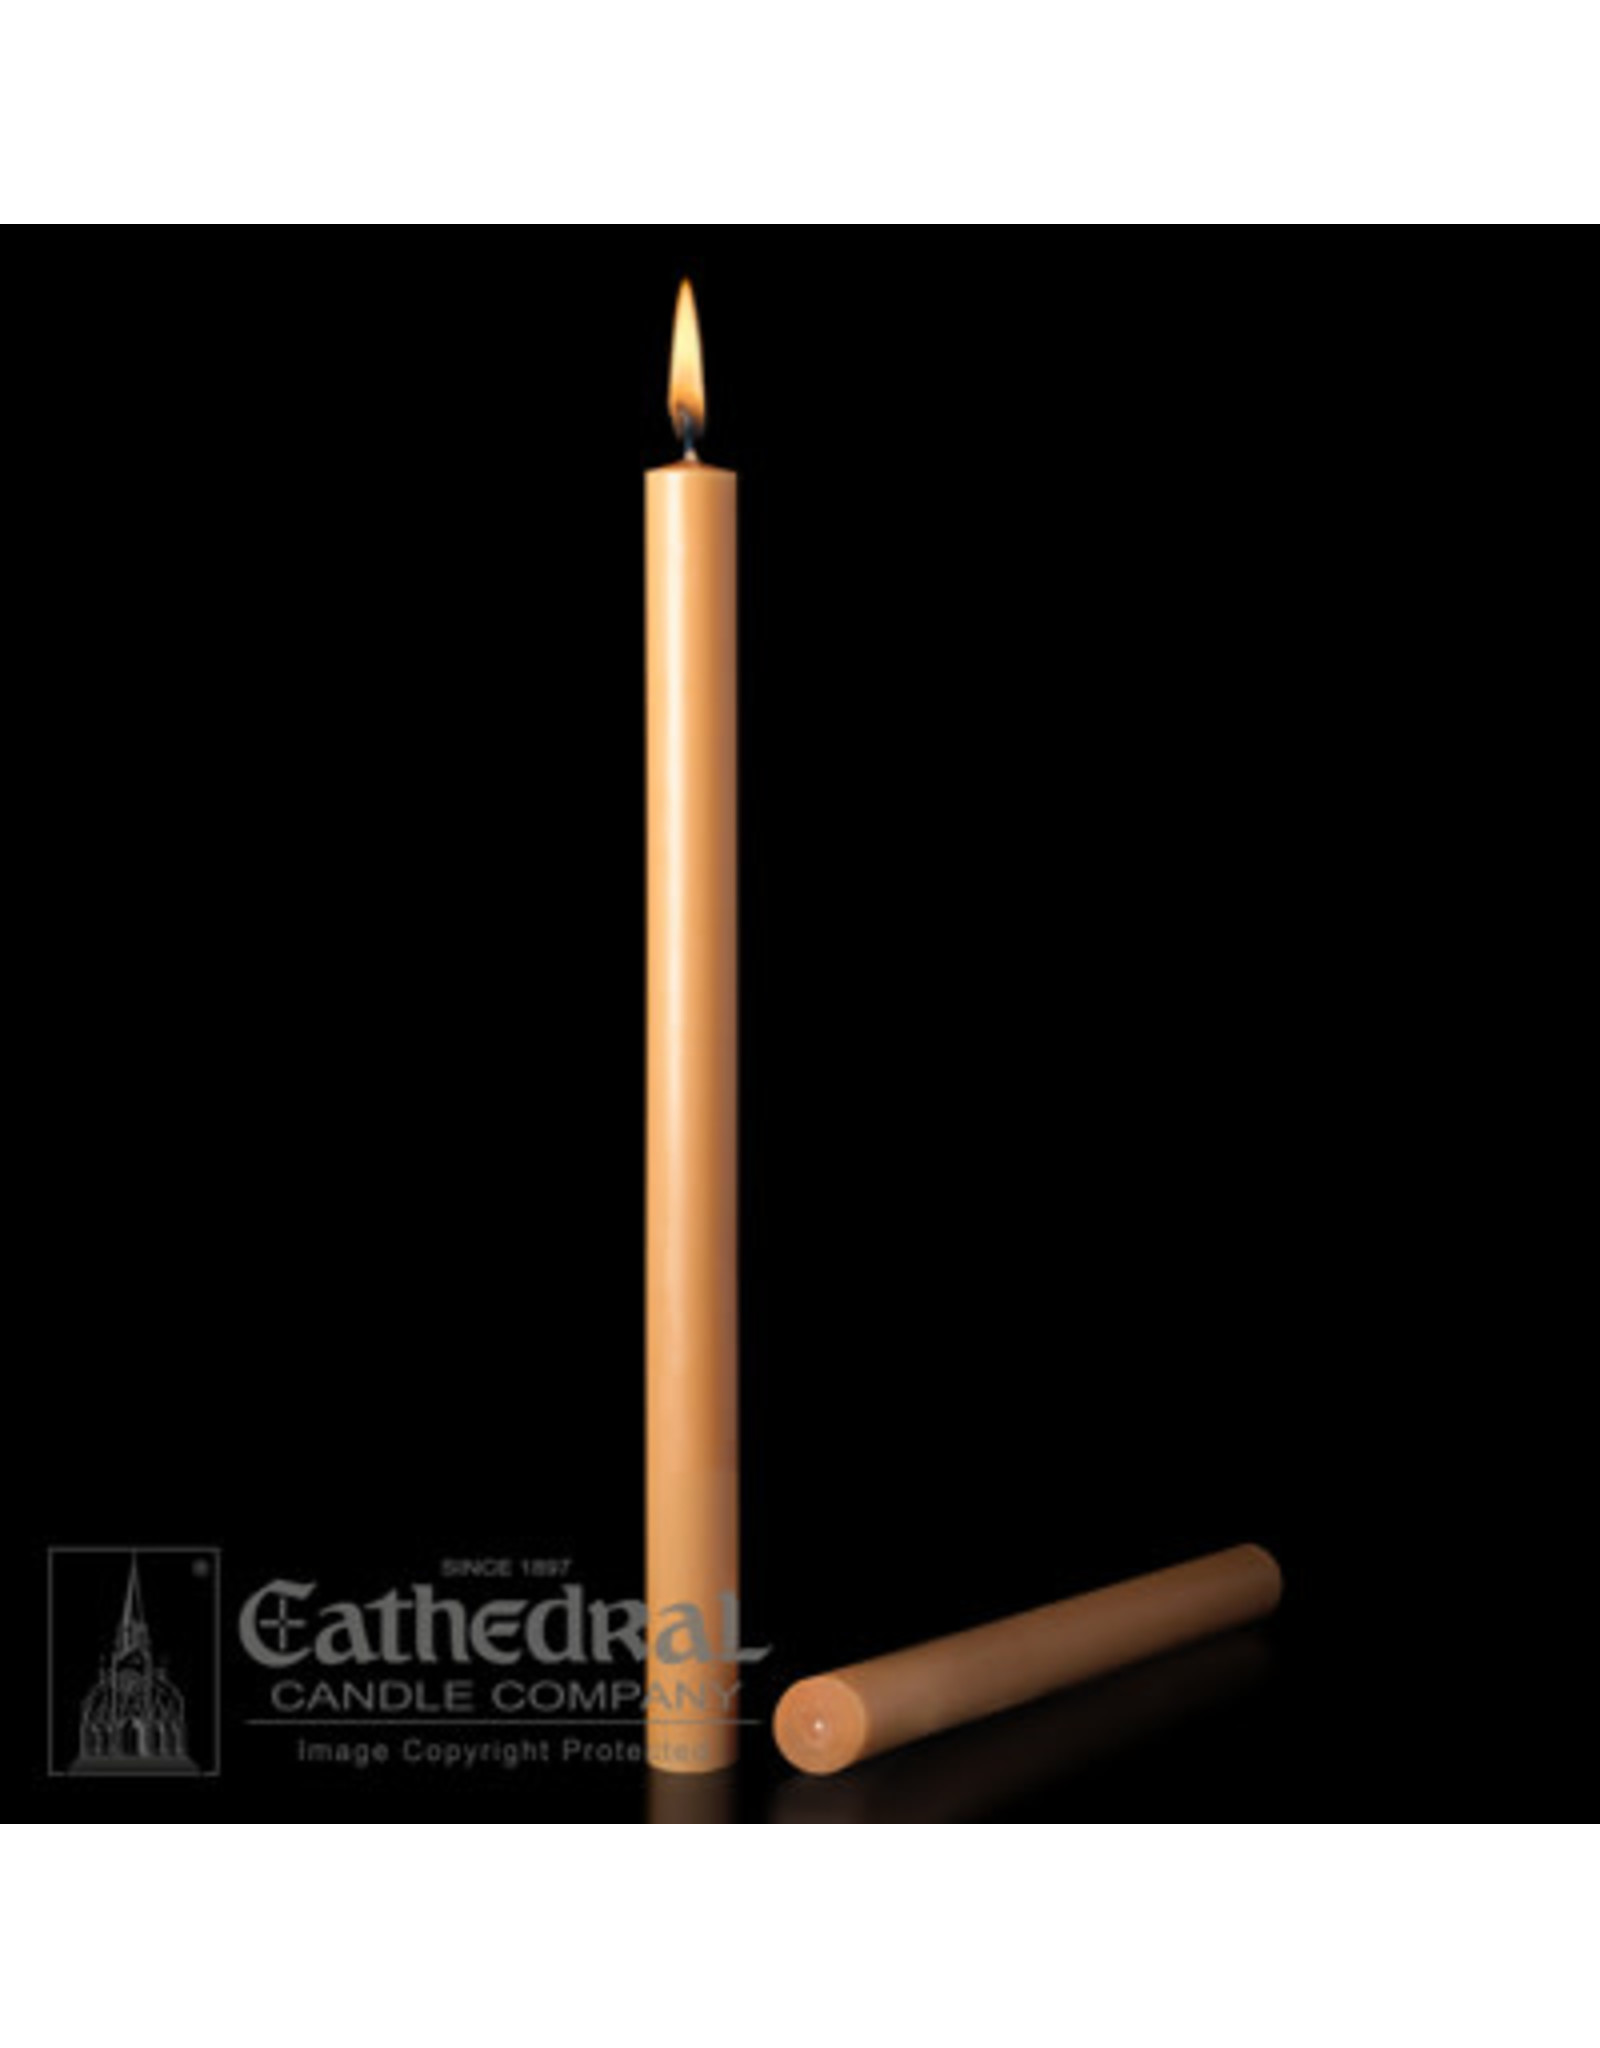 Cathedral Candle Unbleached 51% Beeswax Altar Candles 1-1/16"x16-3/4" SFE (12)